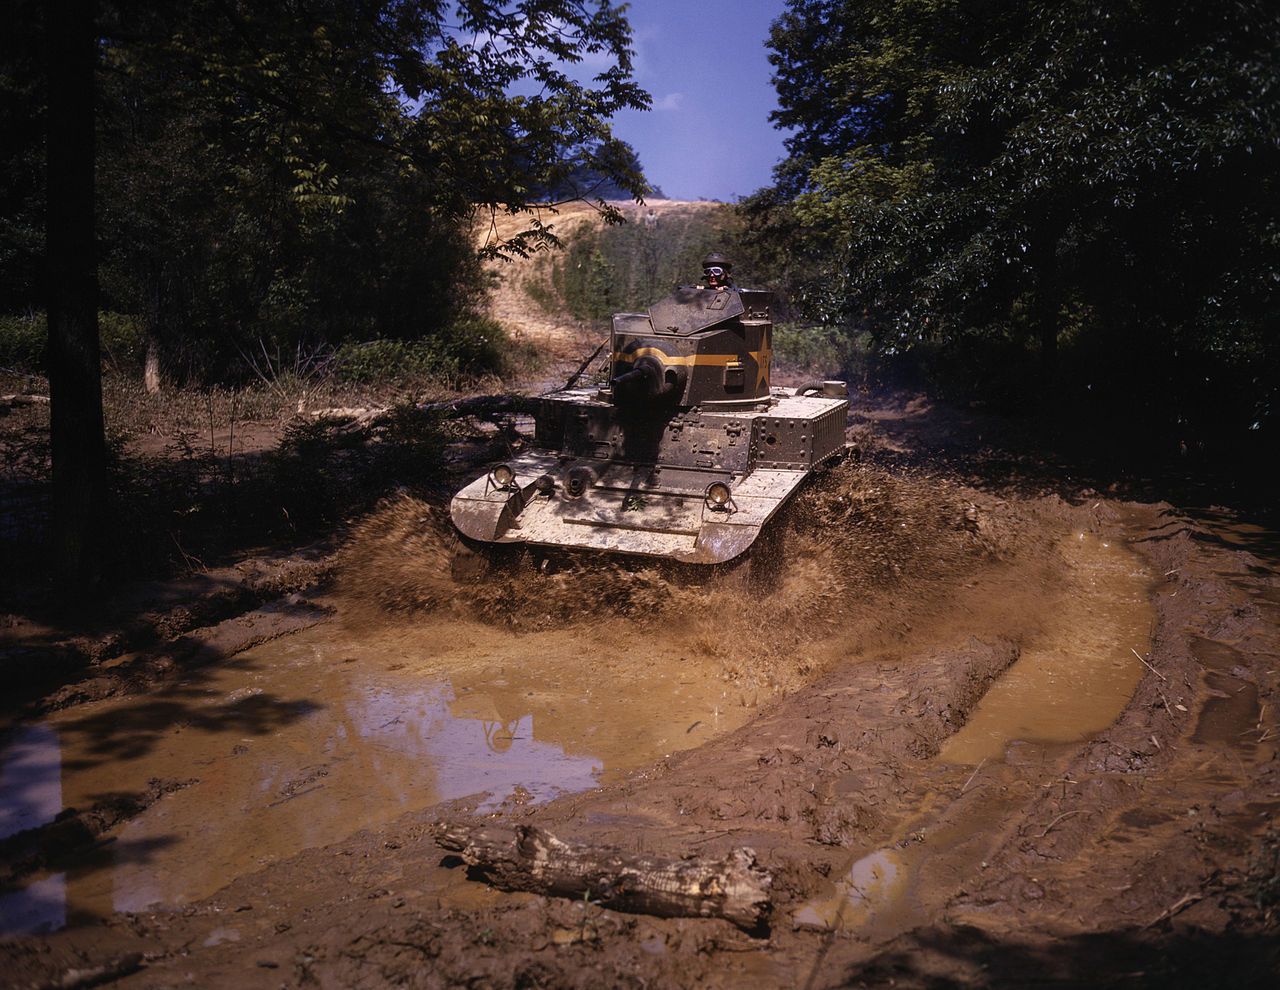 An M3 Stuart light tank going through water obstacle, Ft Knox, KY, 1942